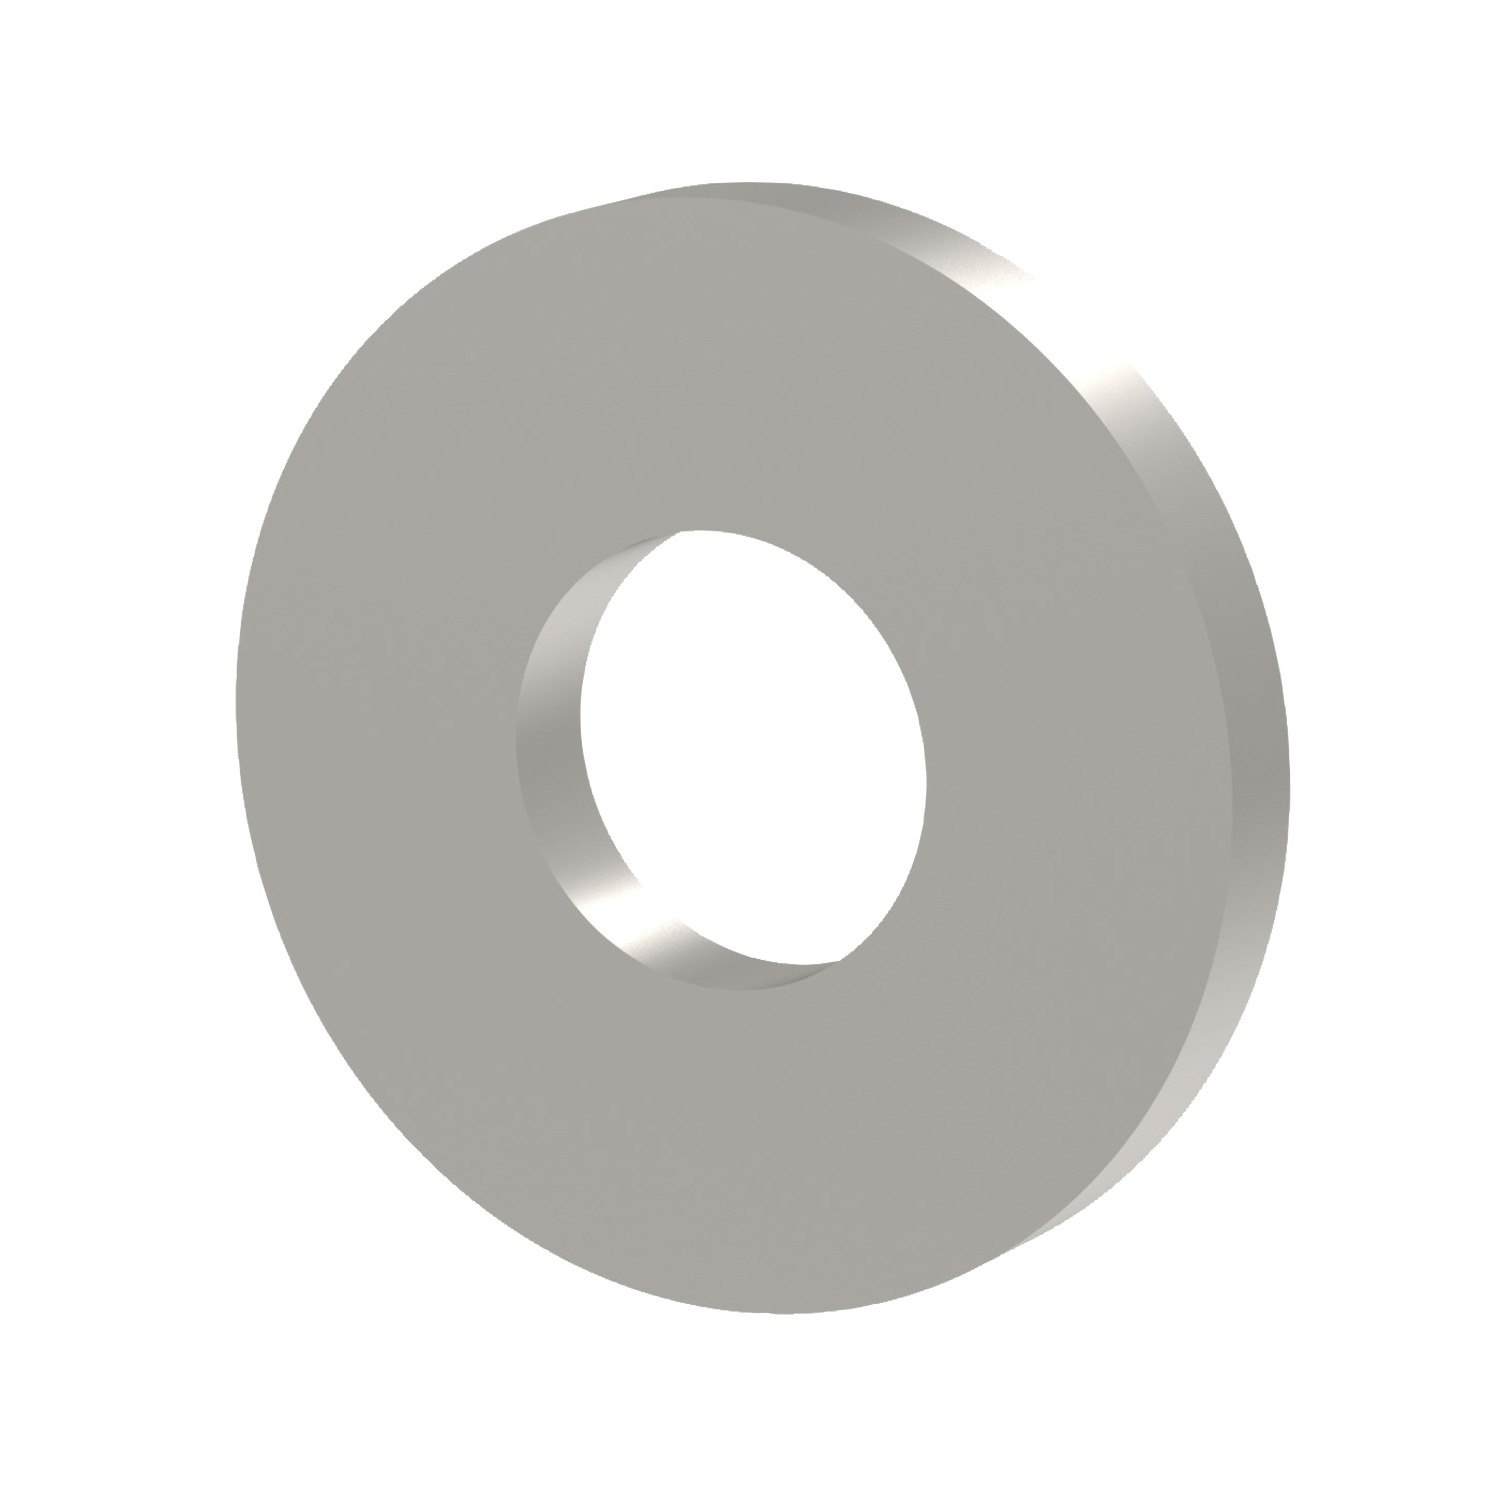 P0330.100-A4 Form A Flat Washer  DIN 125A M10 A4 s/s .